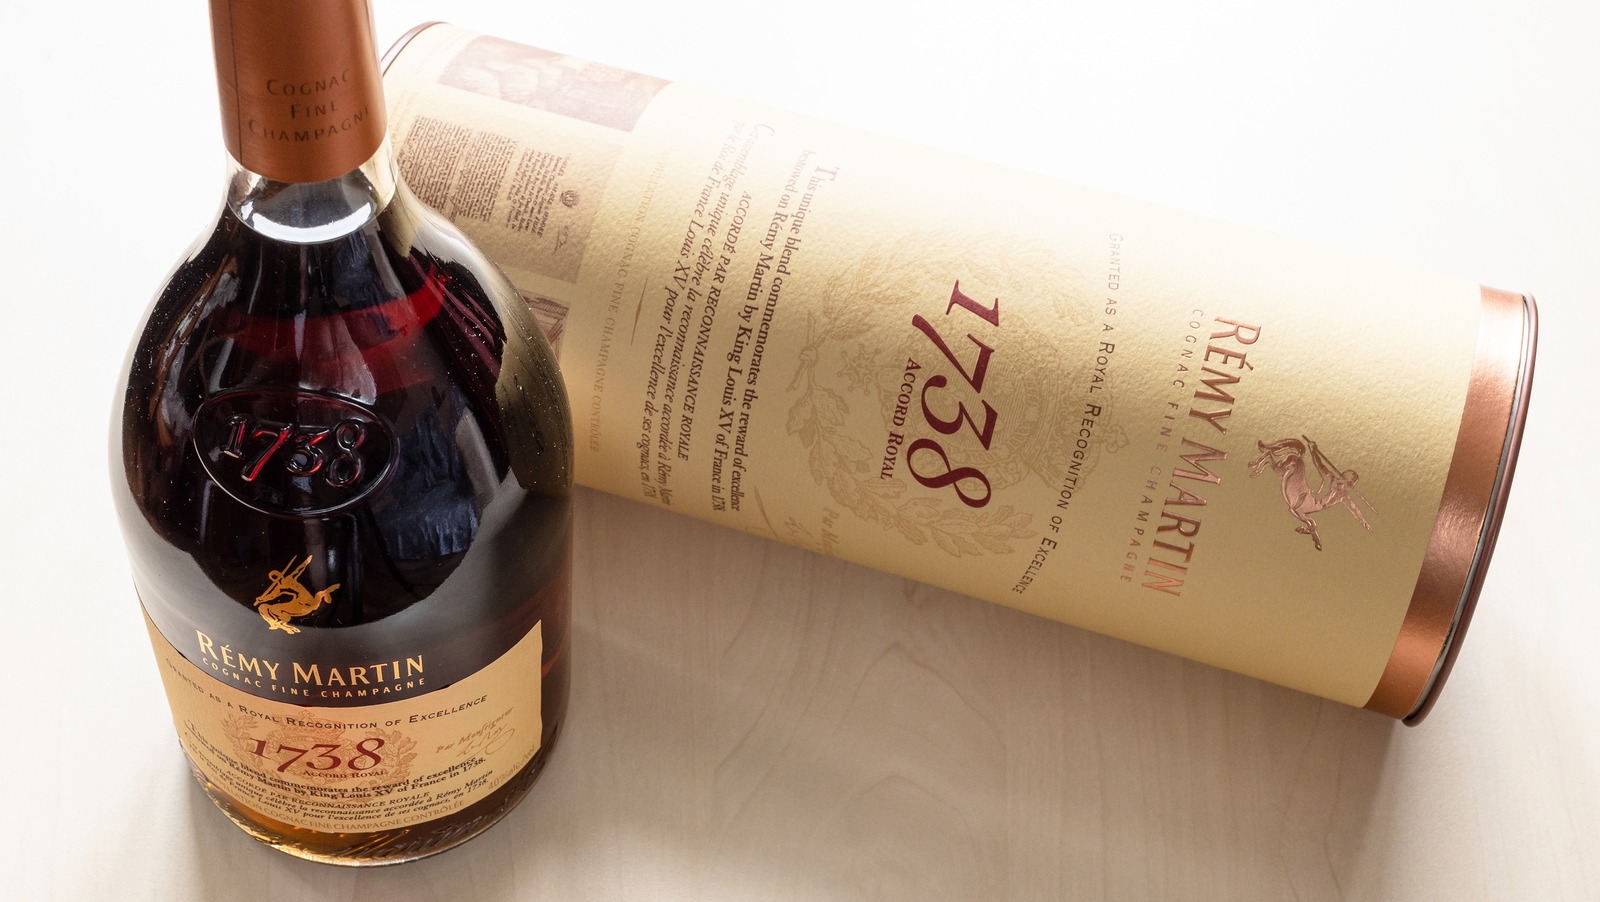 https://www.tastingtable.com/img/gallery/remy-martin-1738-accord-royal-the-ultimate-bottle-guide/l-intro-1662216413.jpg